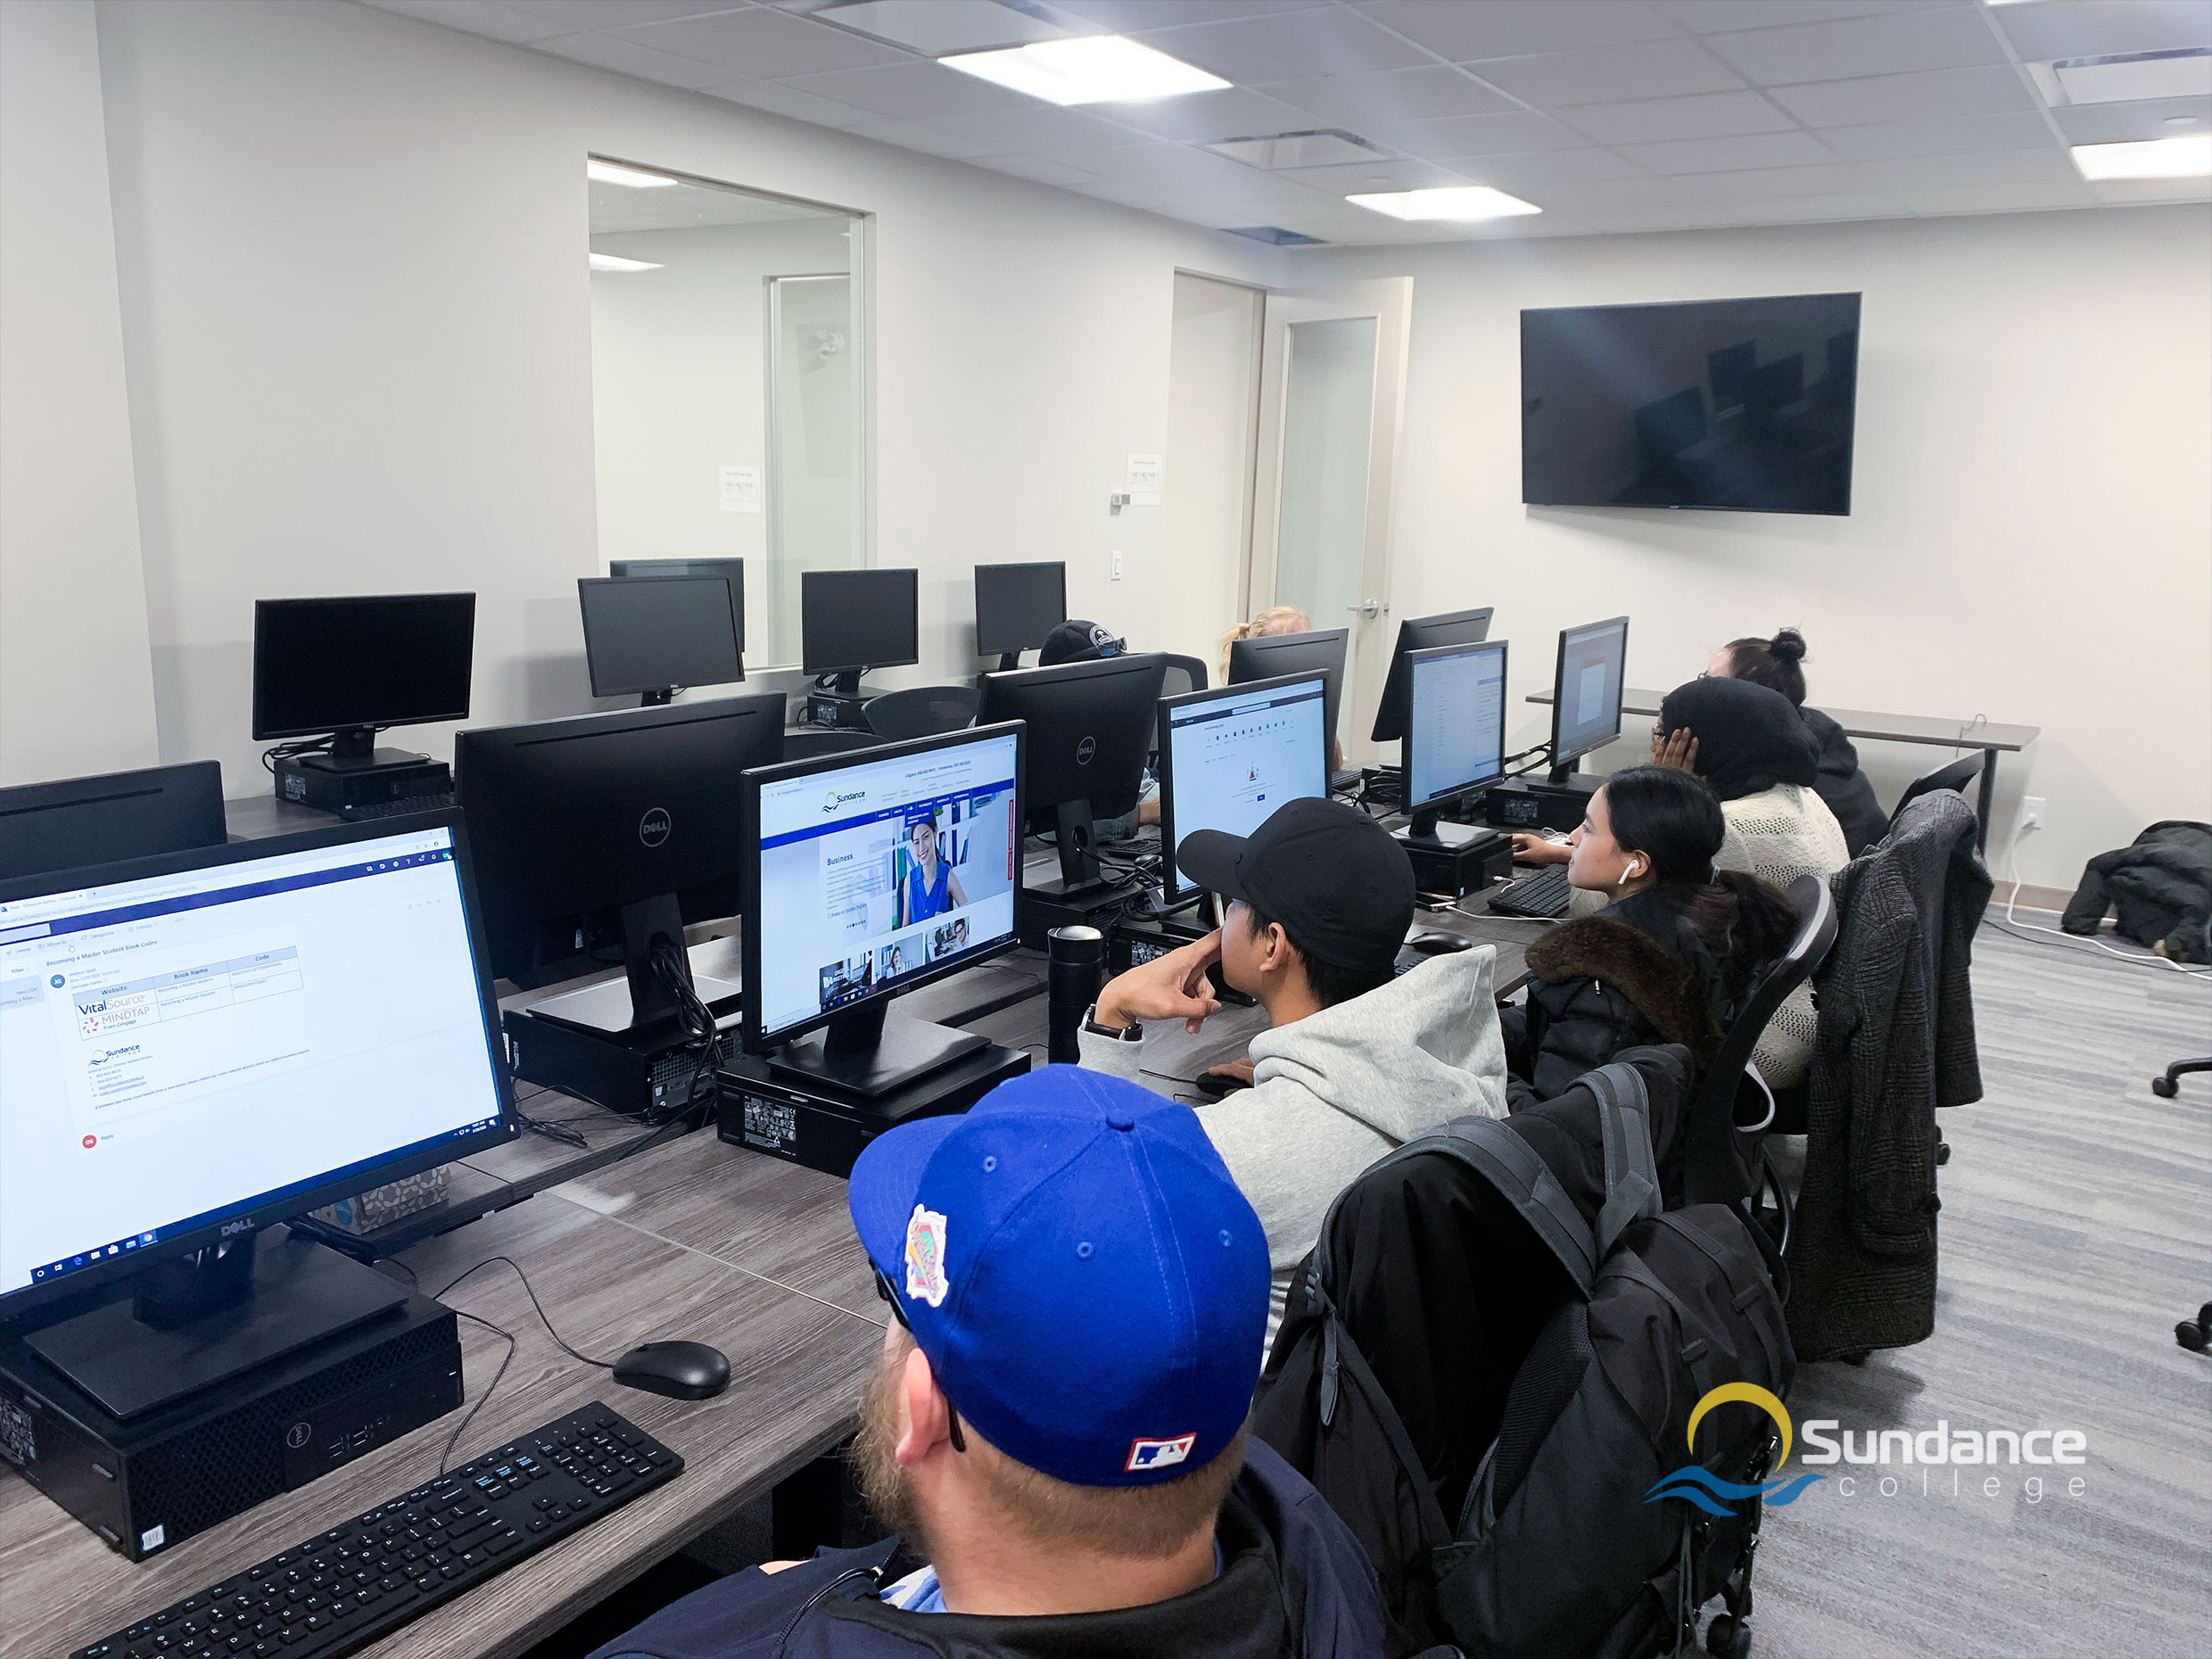 Mobile and Web Developer Diploma students are taking their software development course in one of Sundance College’s on-campus computer learning centers.